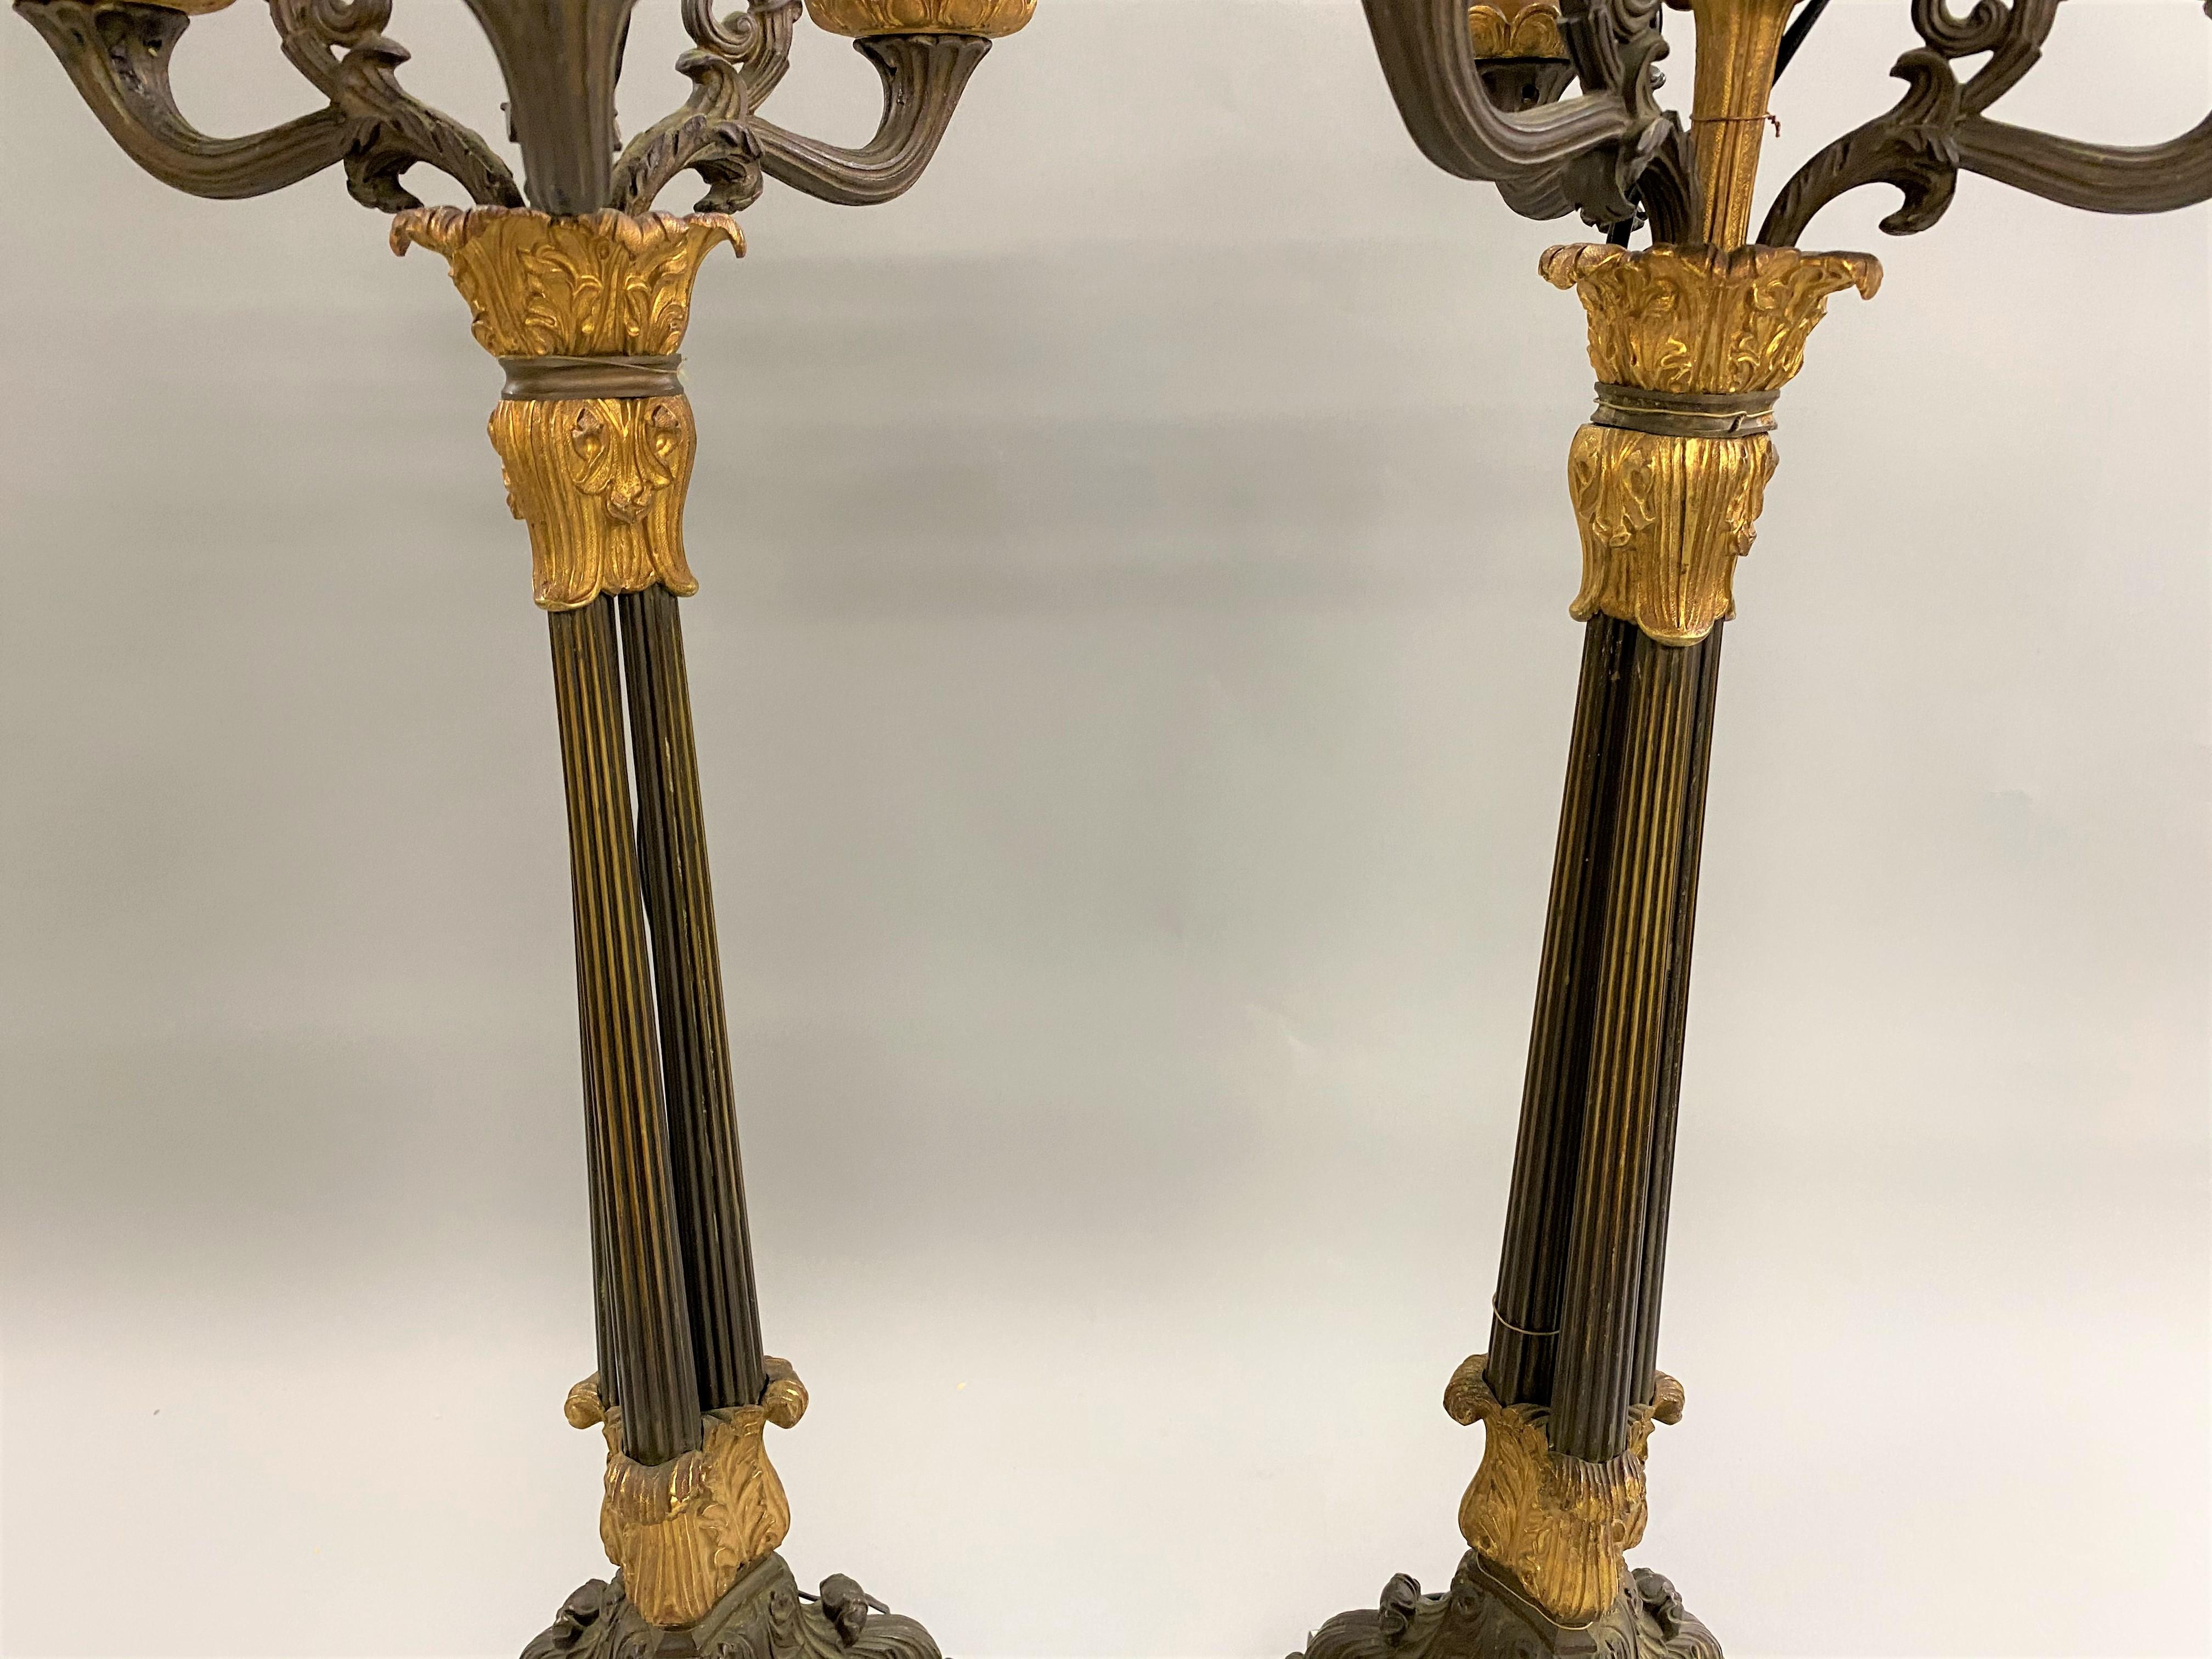 Cast Pair of French Empire Bronze Candelabra Lamps with Ormolu